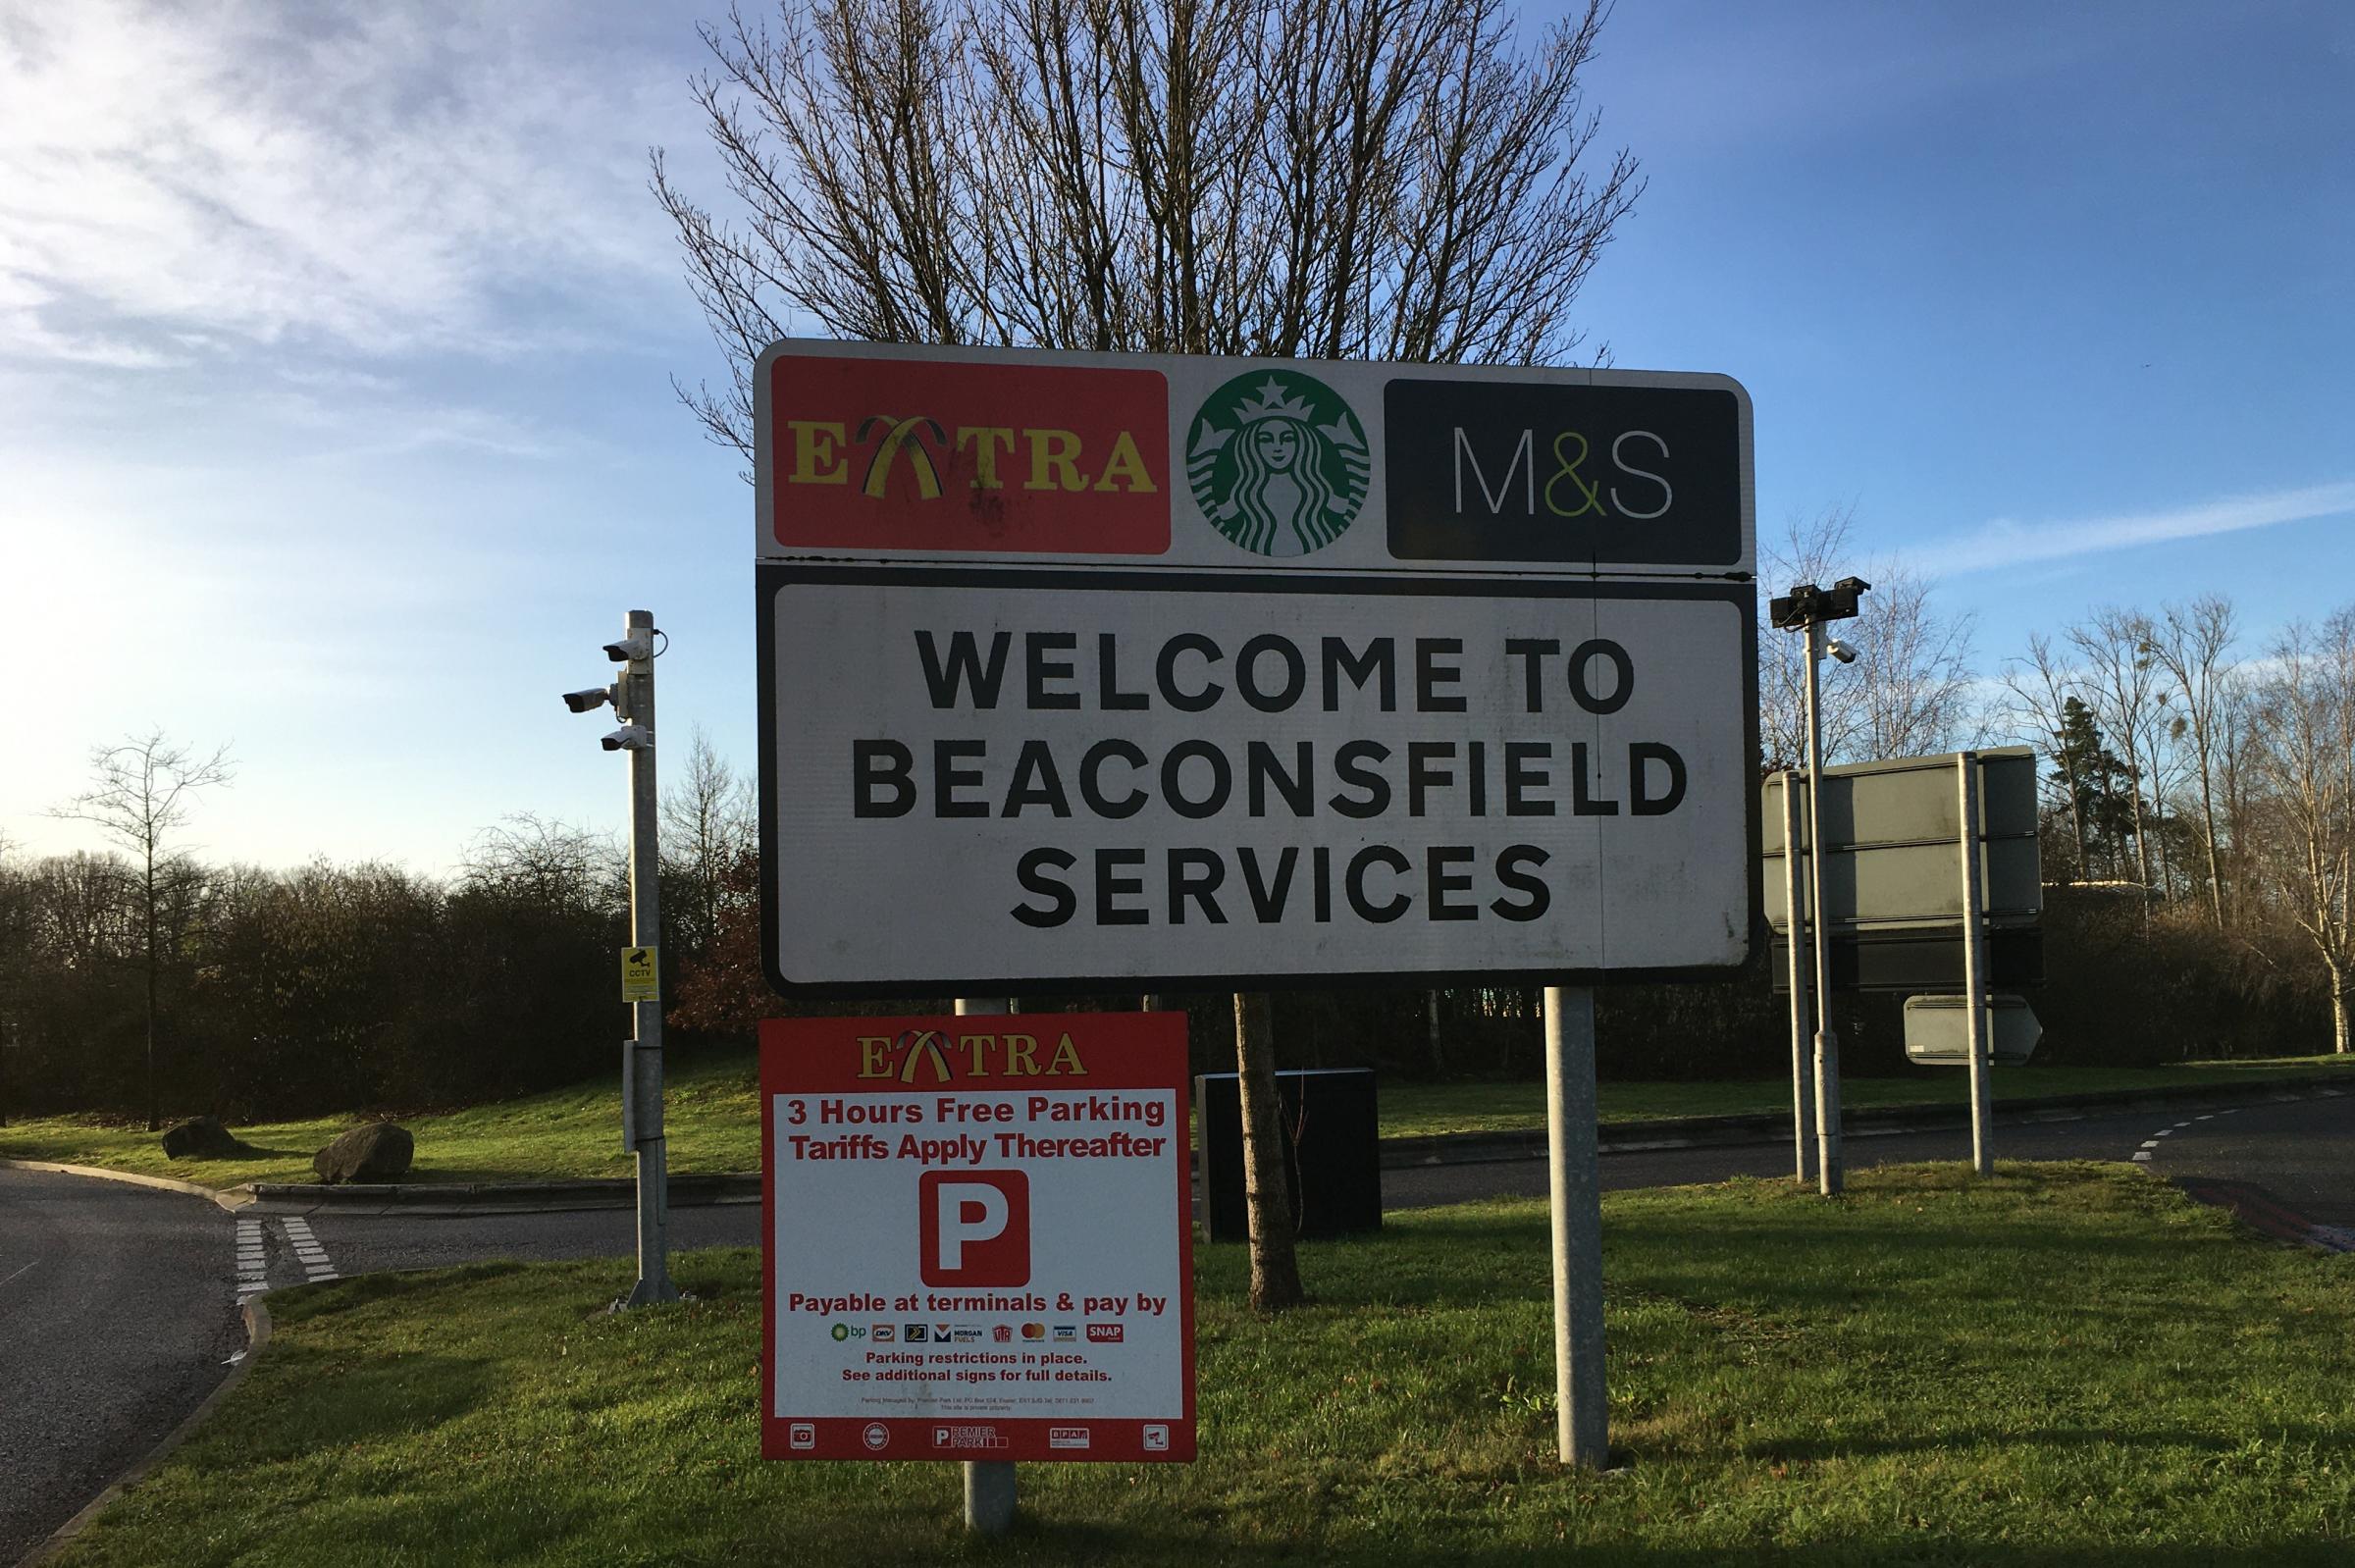 The stadium is a two minute drive away from Beaconsfield Services 